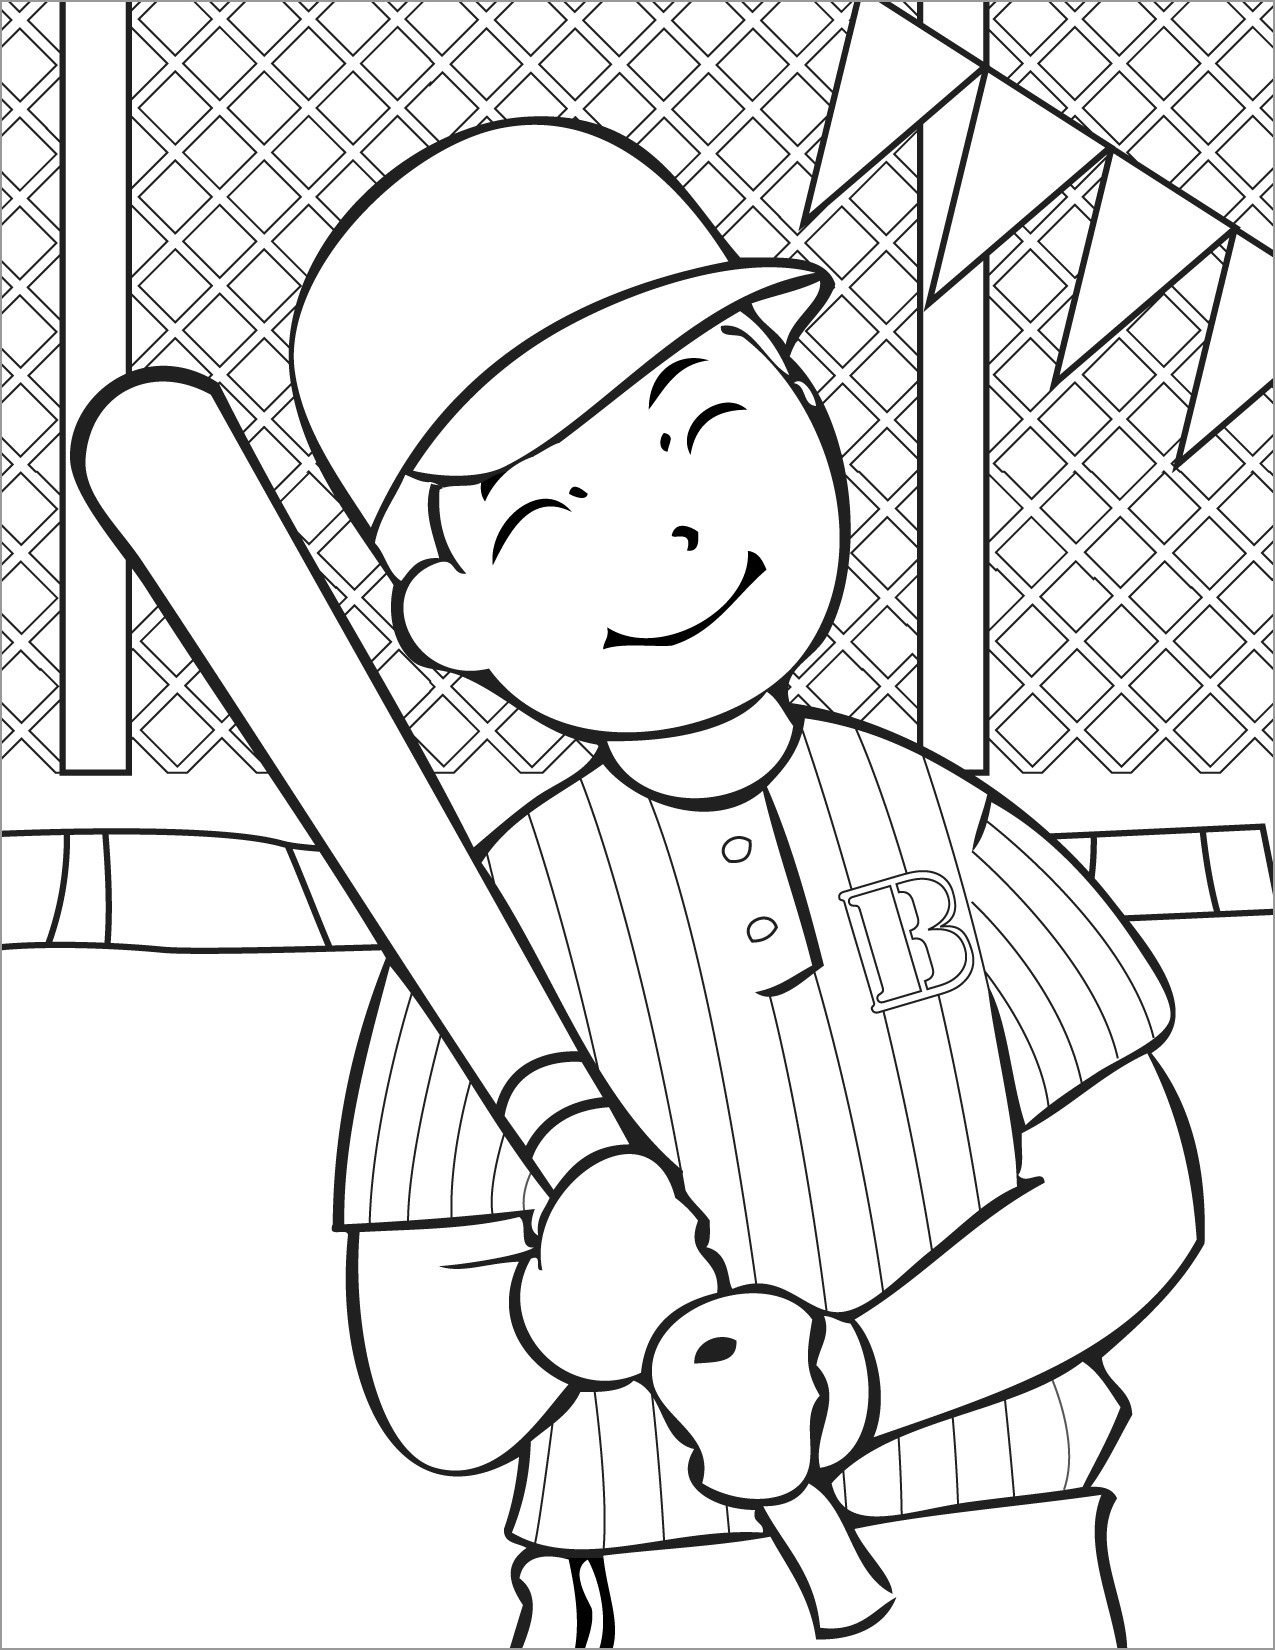 Cute Baseball Player Coloring Page